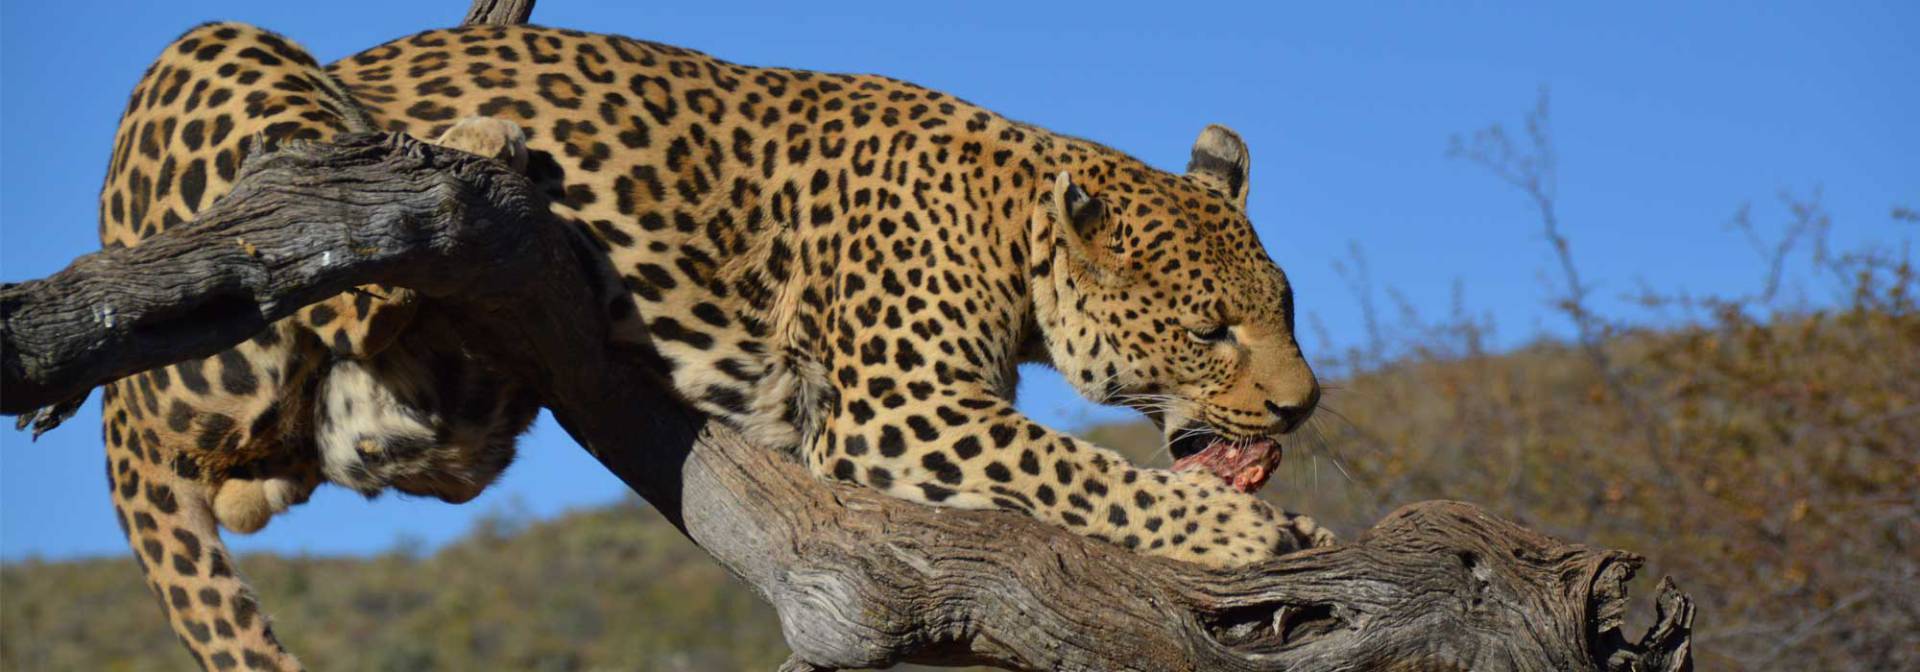 Leopard Conservation in the heart of Namibia